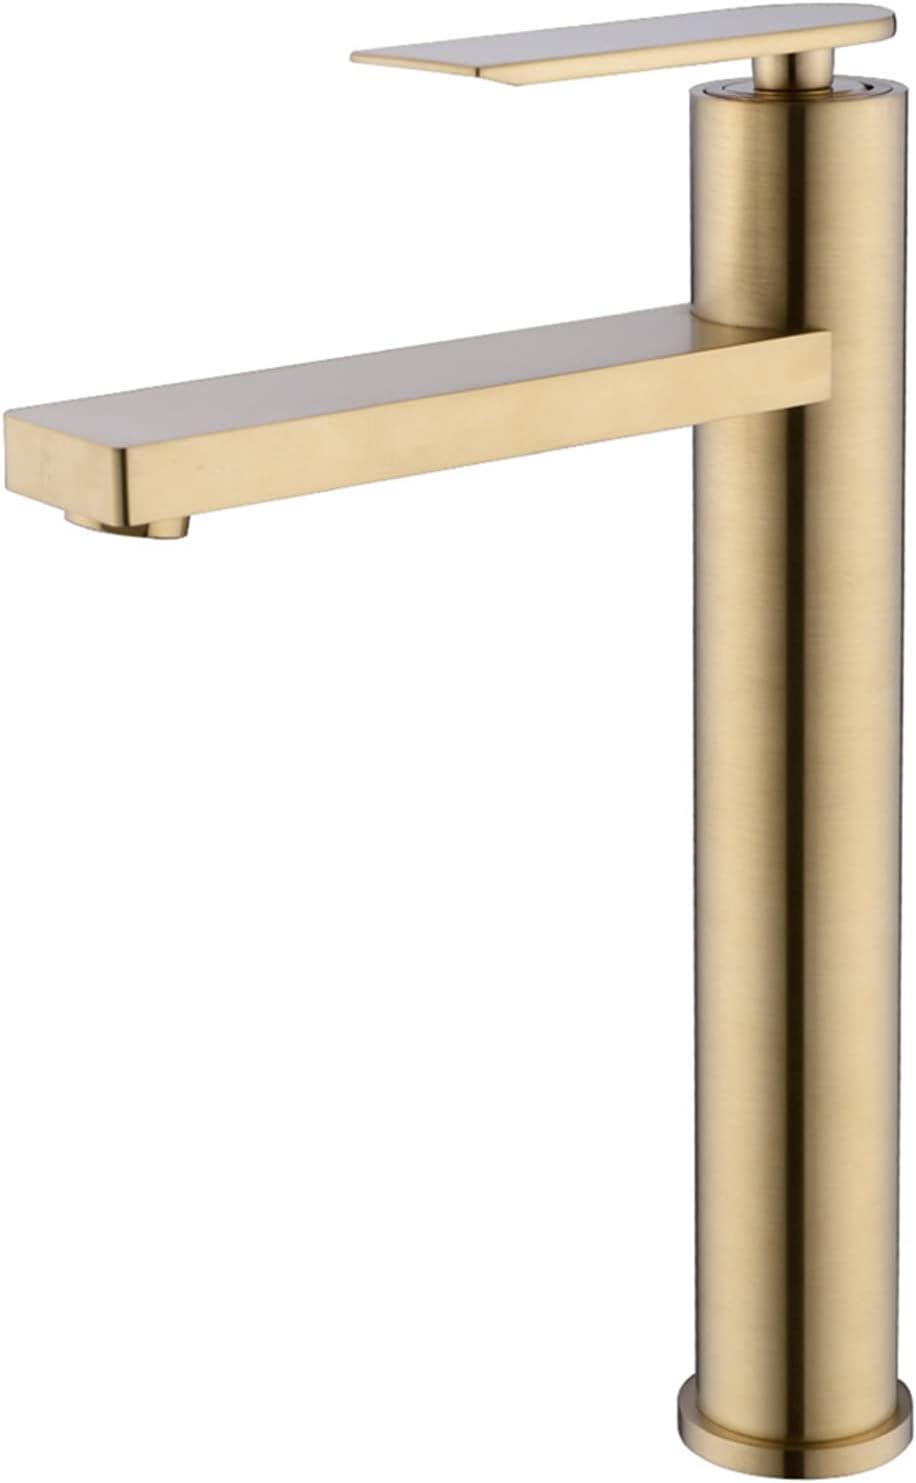 Bathroom Basin Sink Mixer Faucet, Brass Deck Mounted Single Lever Brushed Gold - Massive Discounts